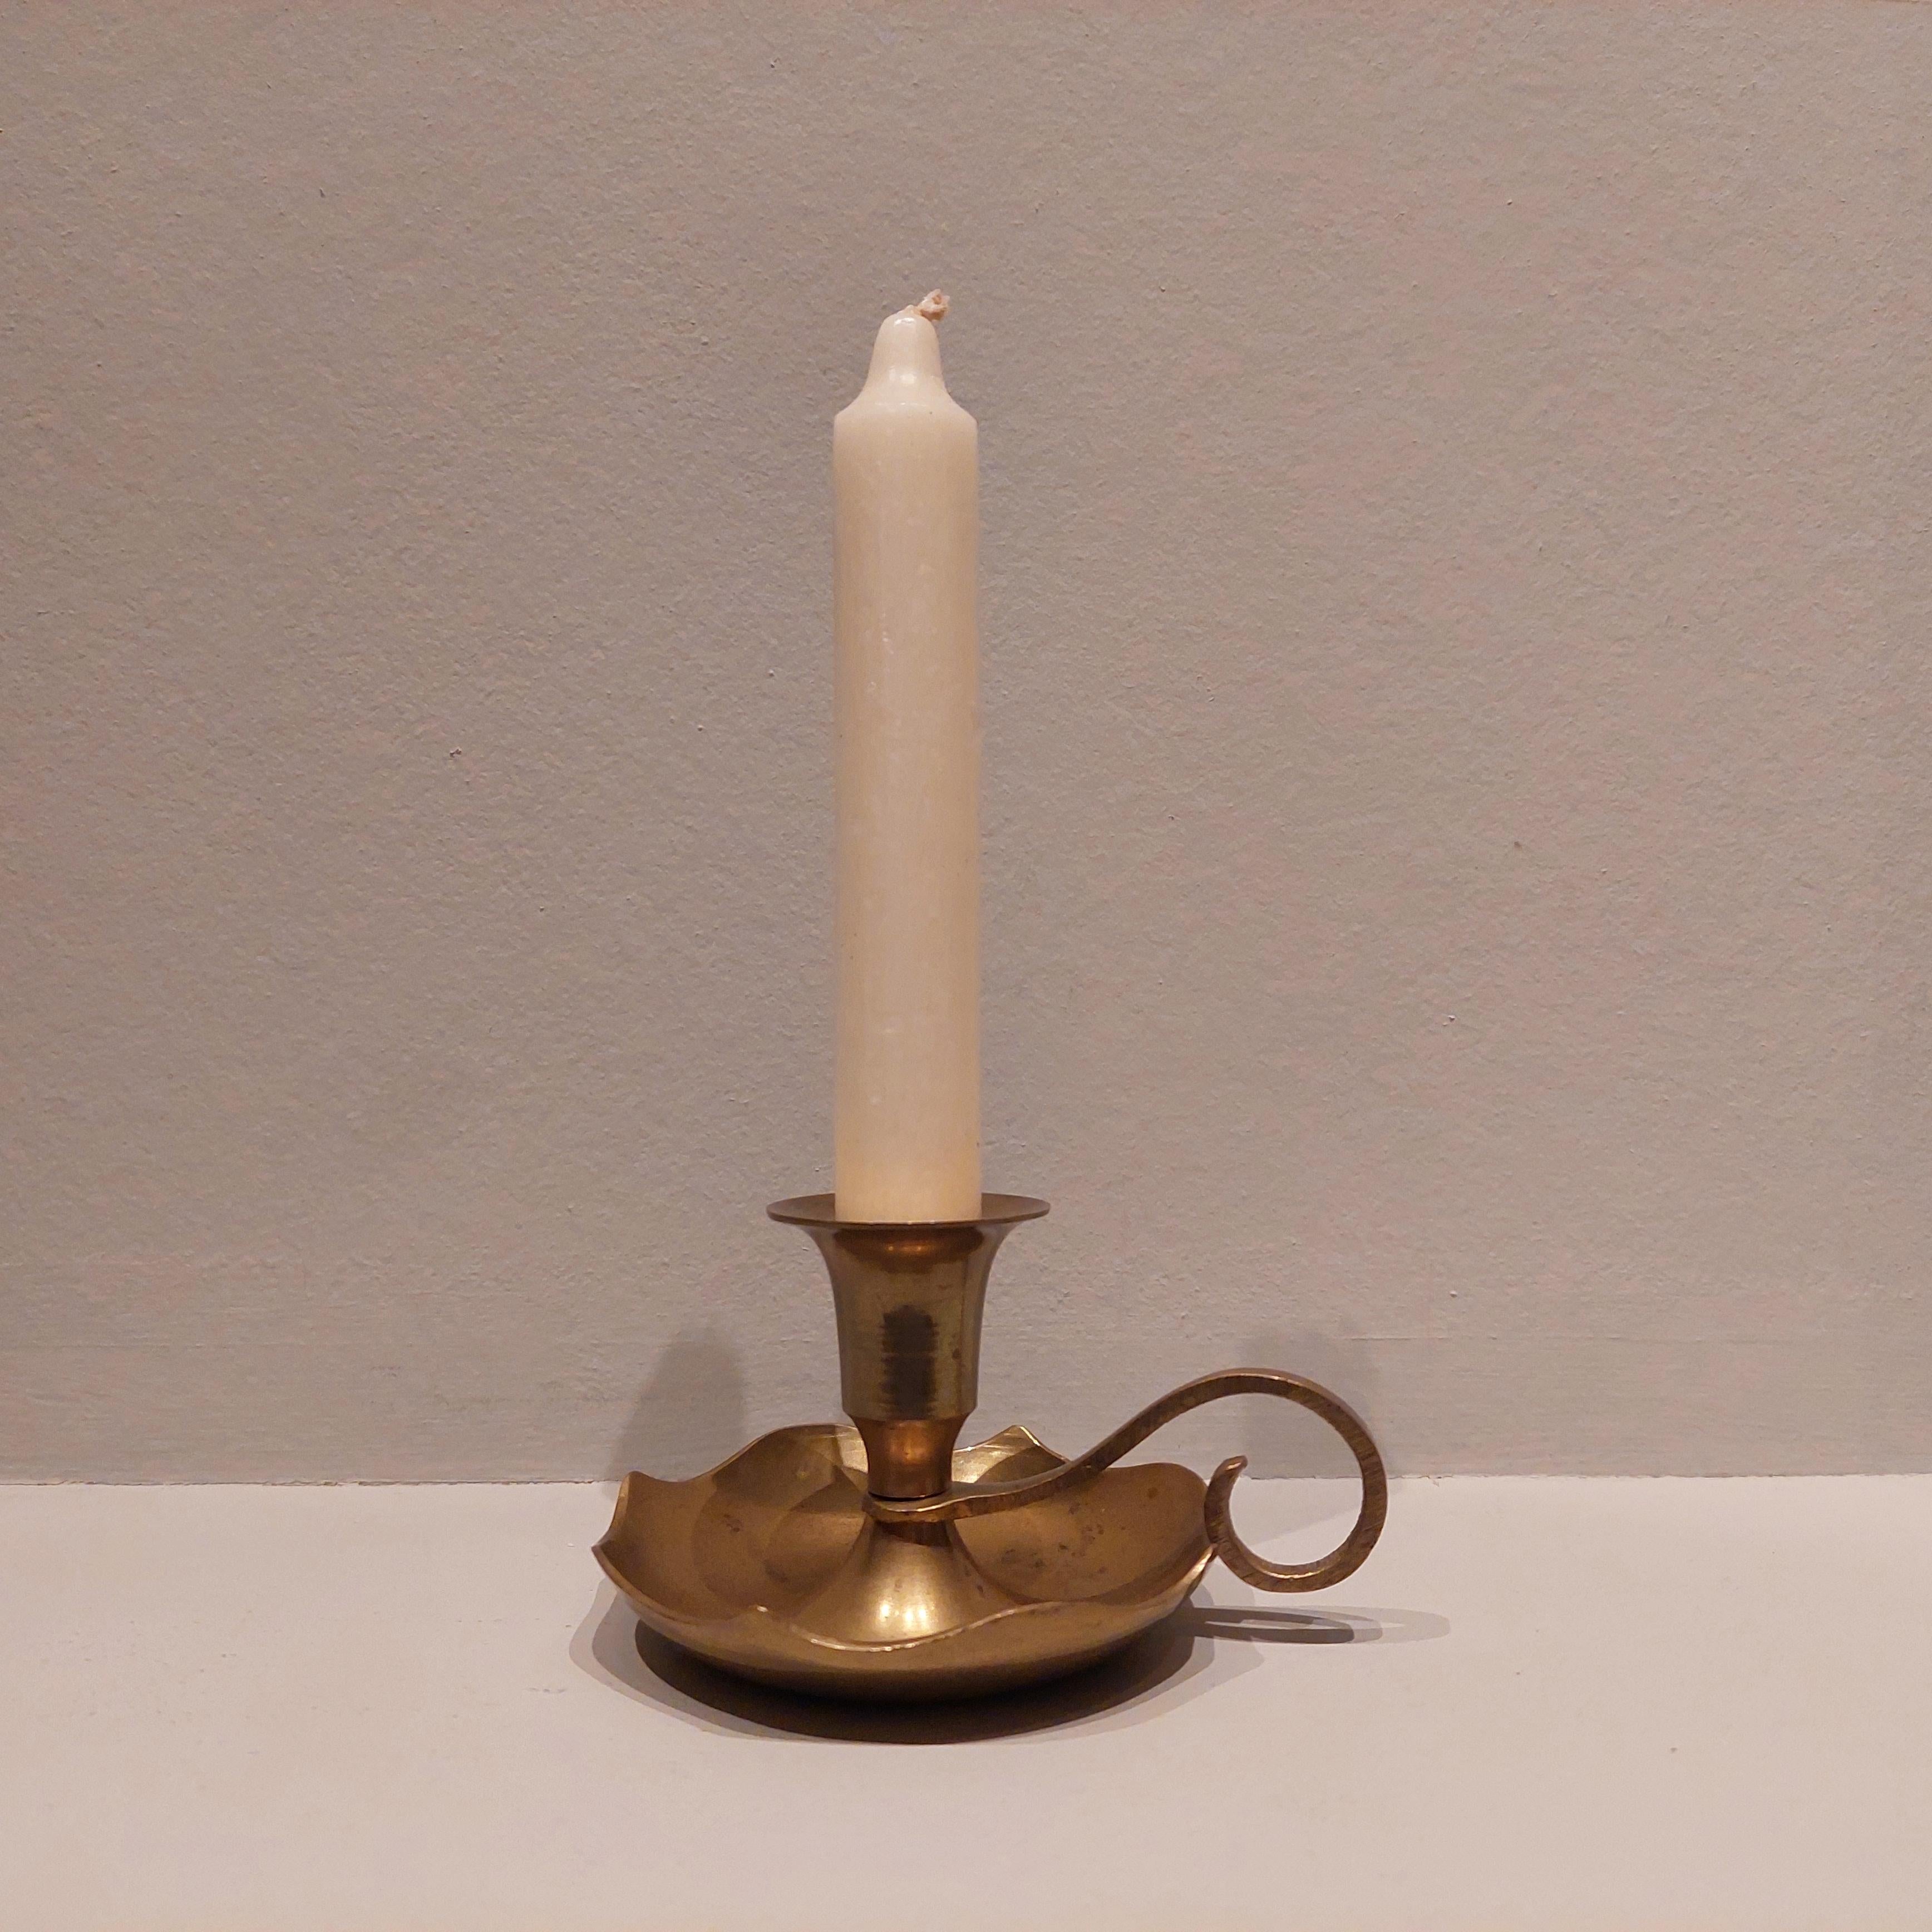 A gorgeous small vintage brass candle holder with scalloped edge and little side handle in lovely vintage condition. 
A very sweet piece and great fun to style.  
A vintage  brass Wee willy wink style candle stick holder.
Candle holder with